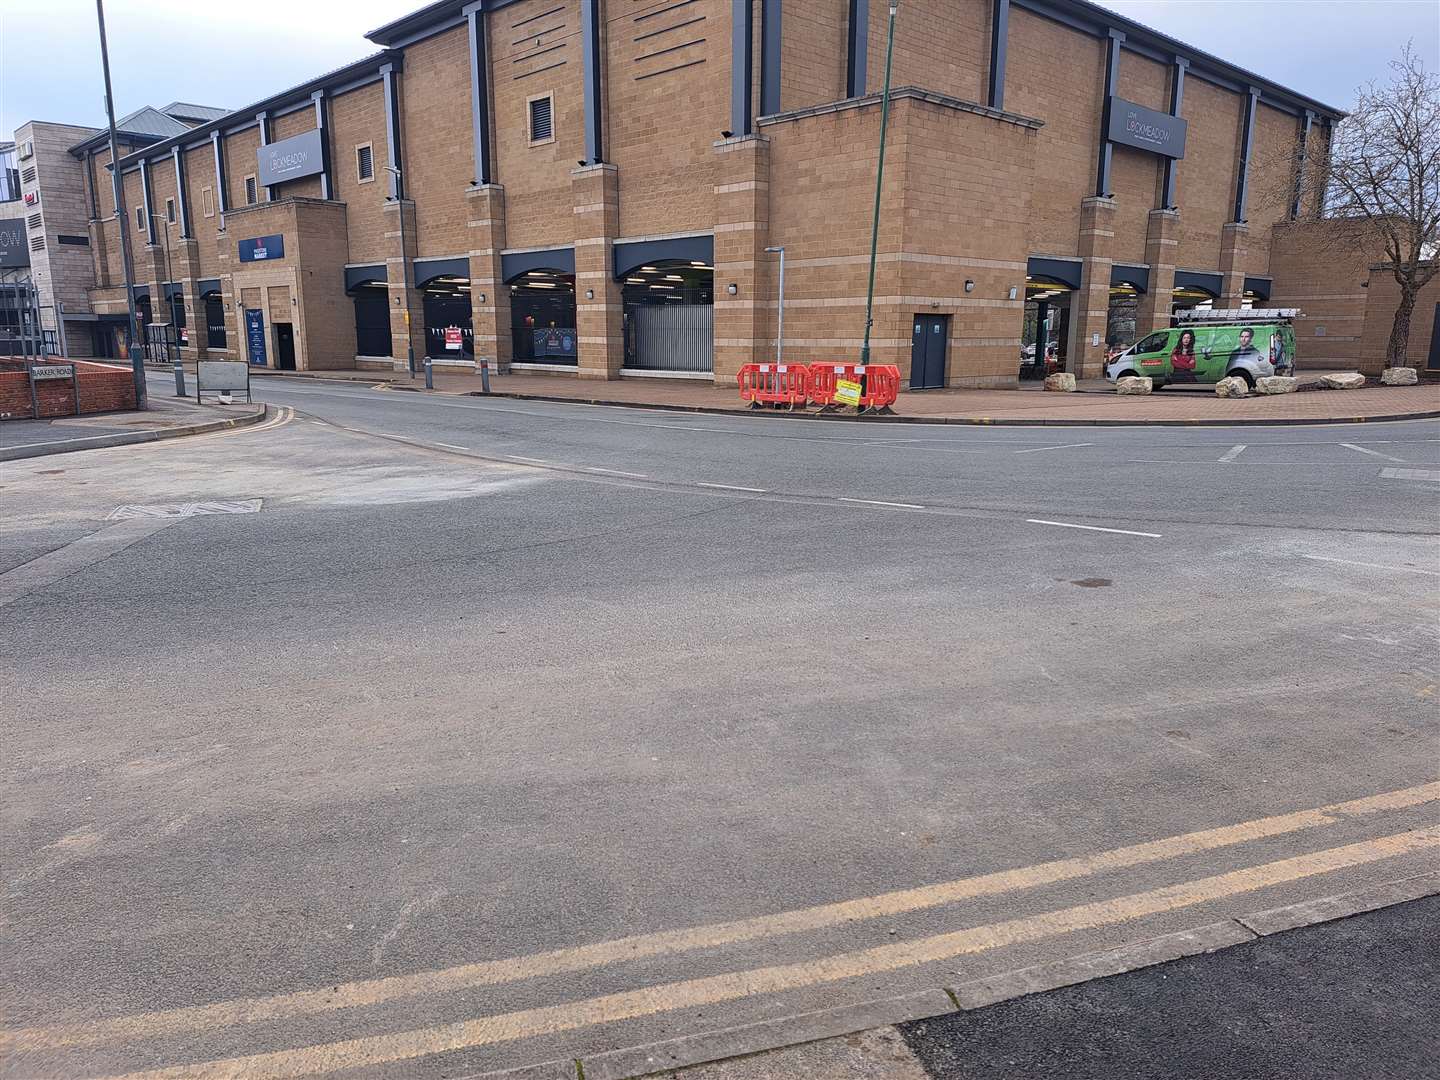 The kerbs have been altered at the junction, but still no roundabout